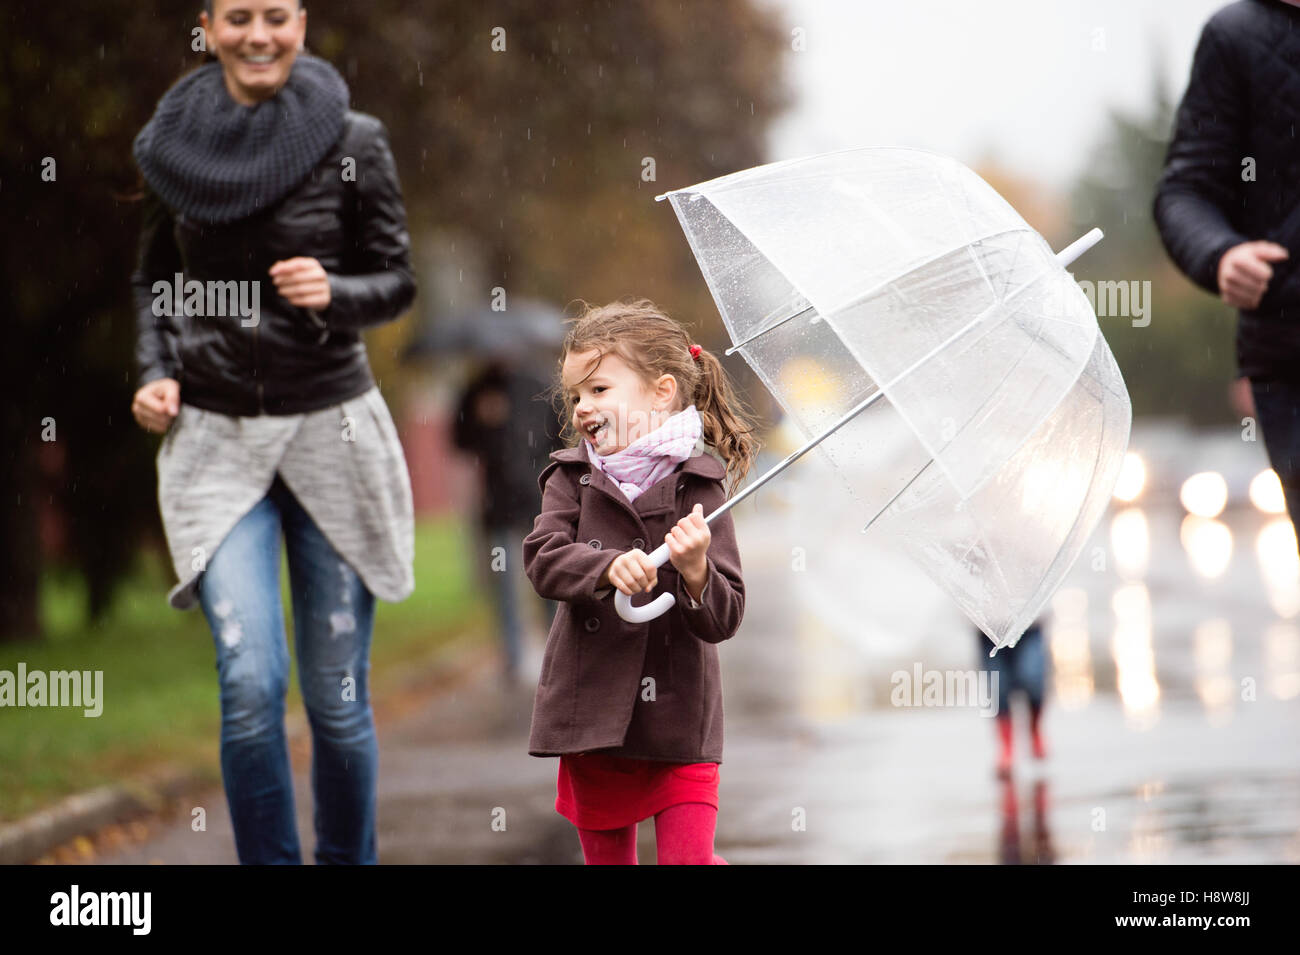 Little girl under the umbrella with her family, running. Rainy d Stock Photo